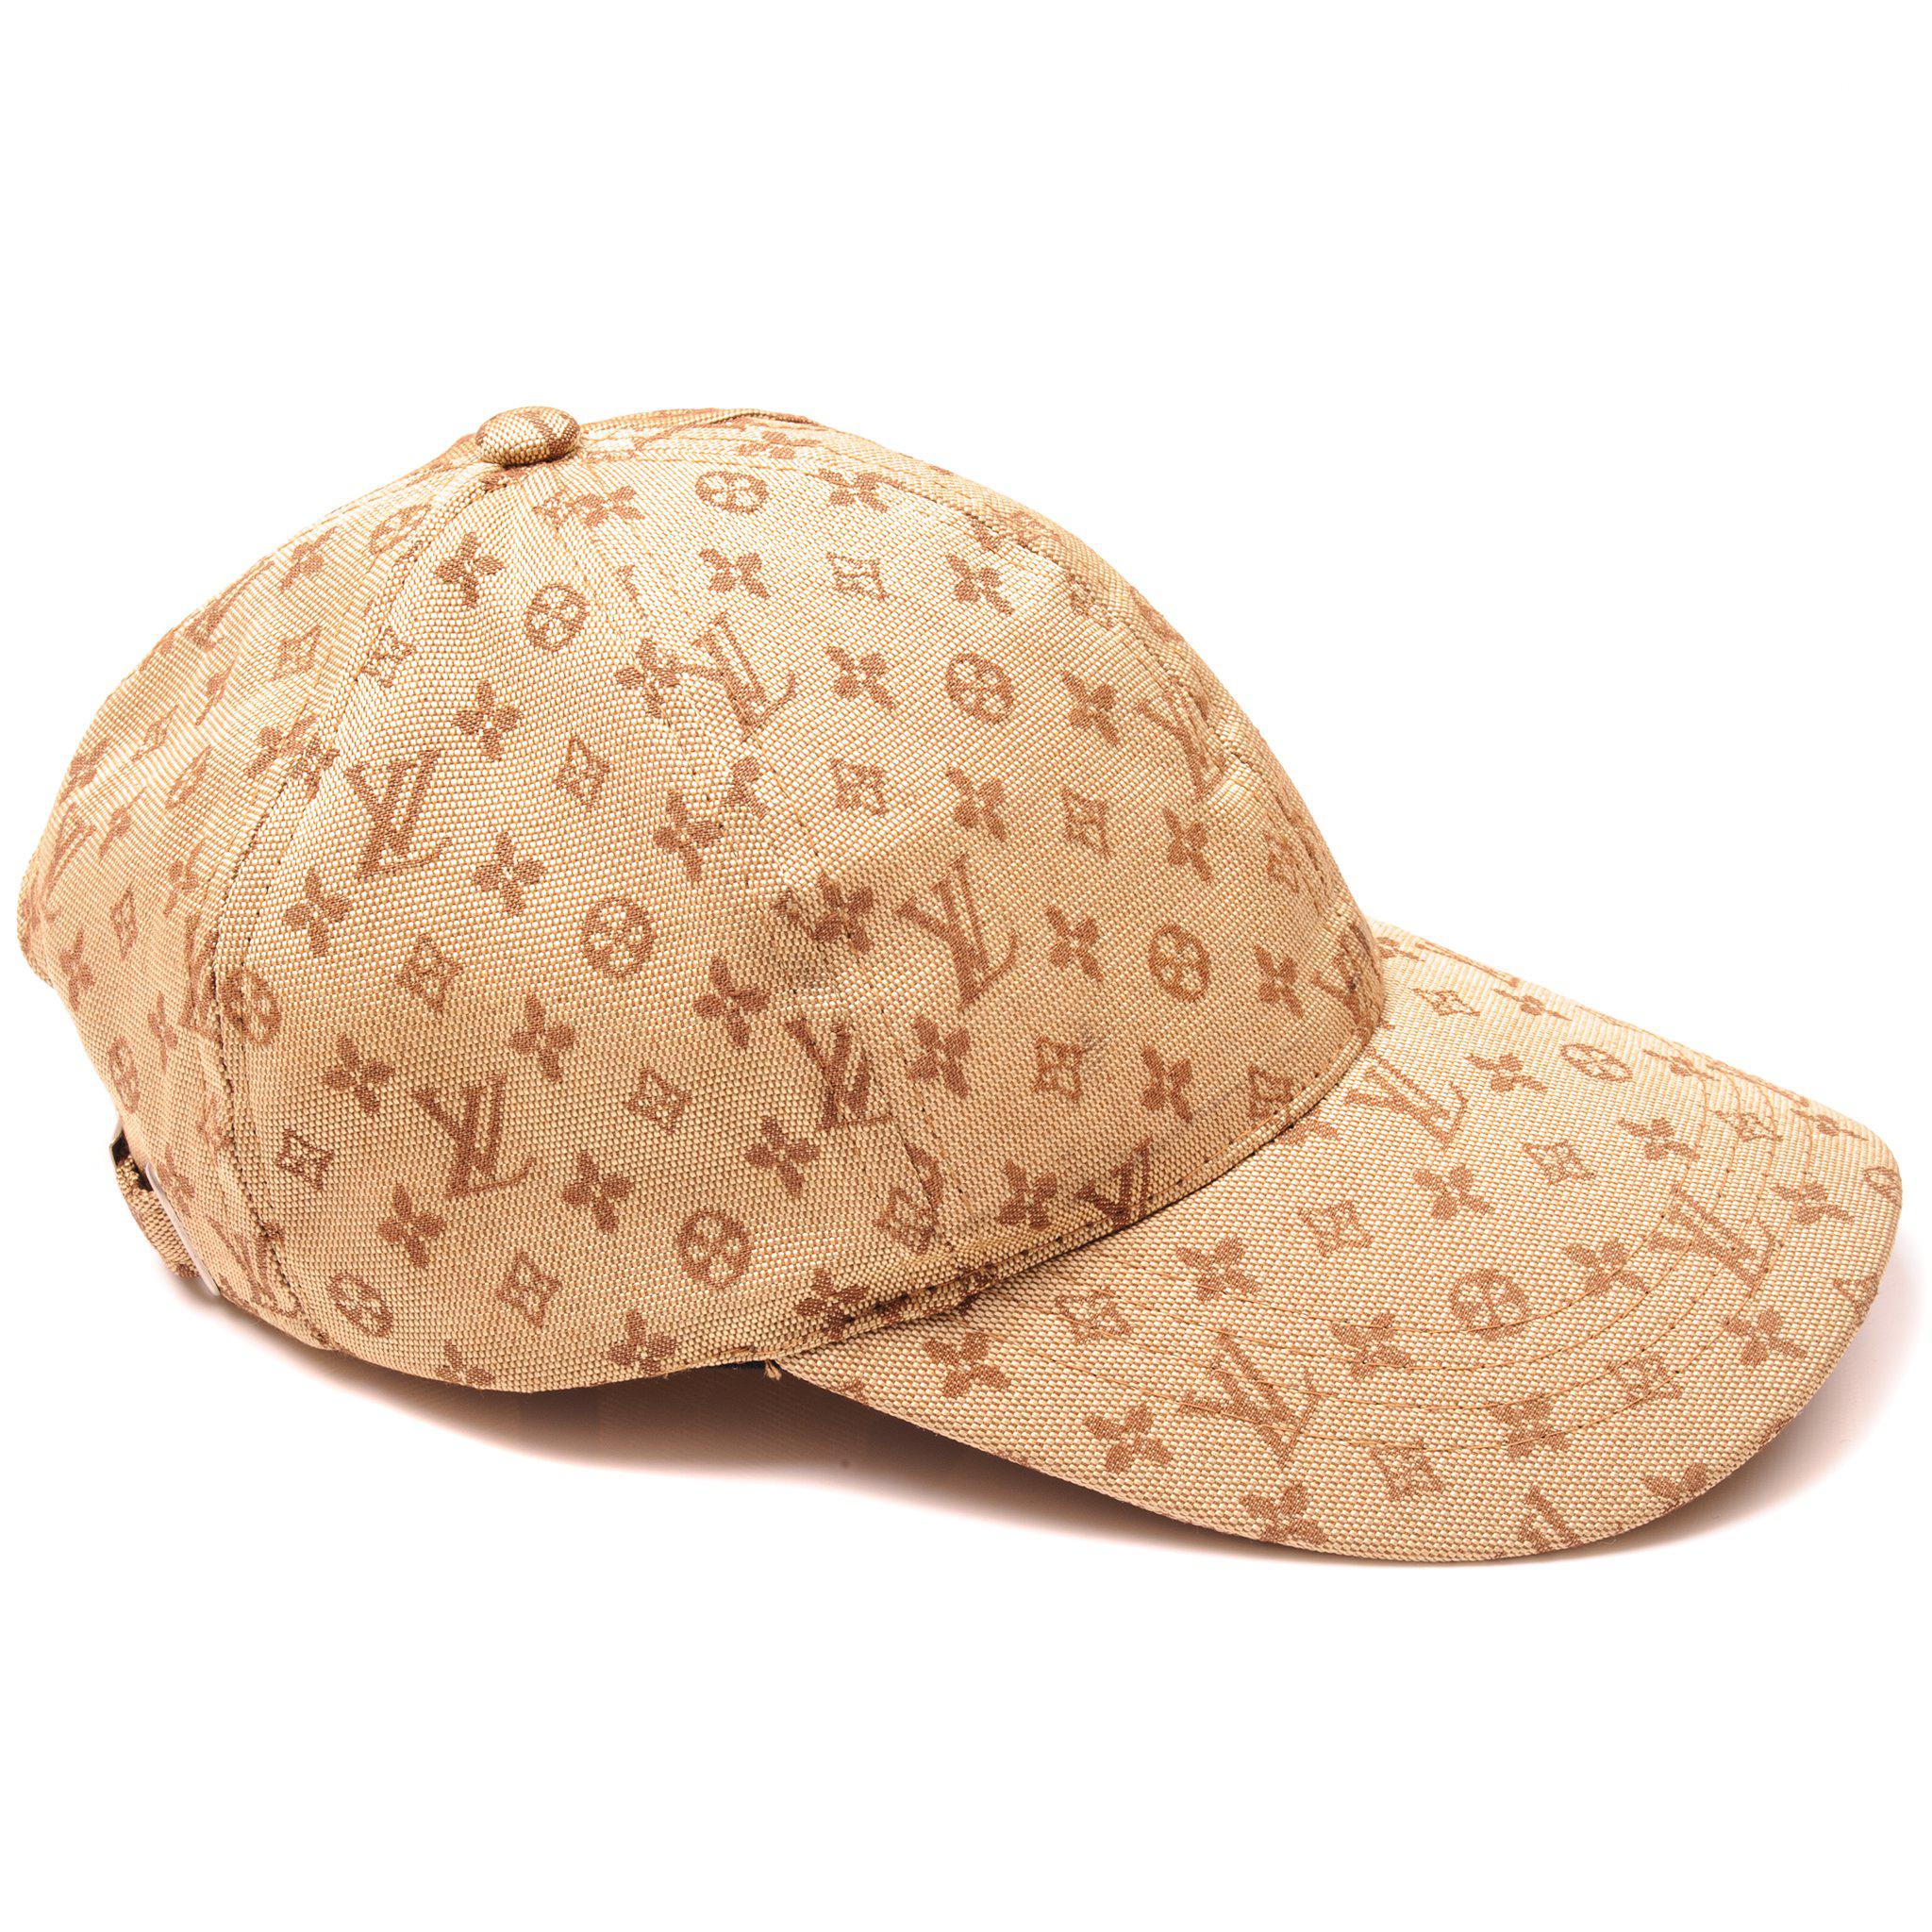 Louis Vuitton Hats - 69 For Sale on 1stDibs  hat louis vuitton, lv hats  price, louis vuitton hard hat